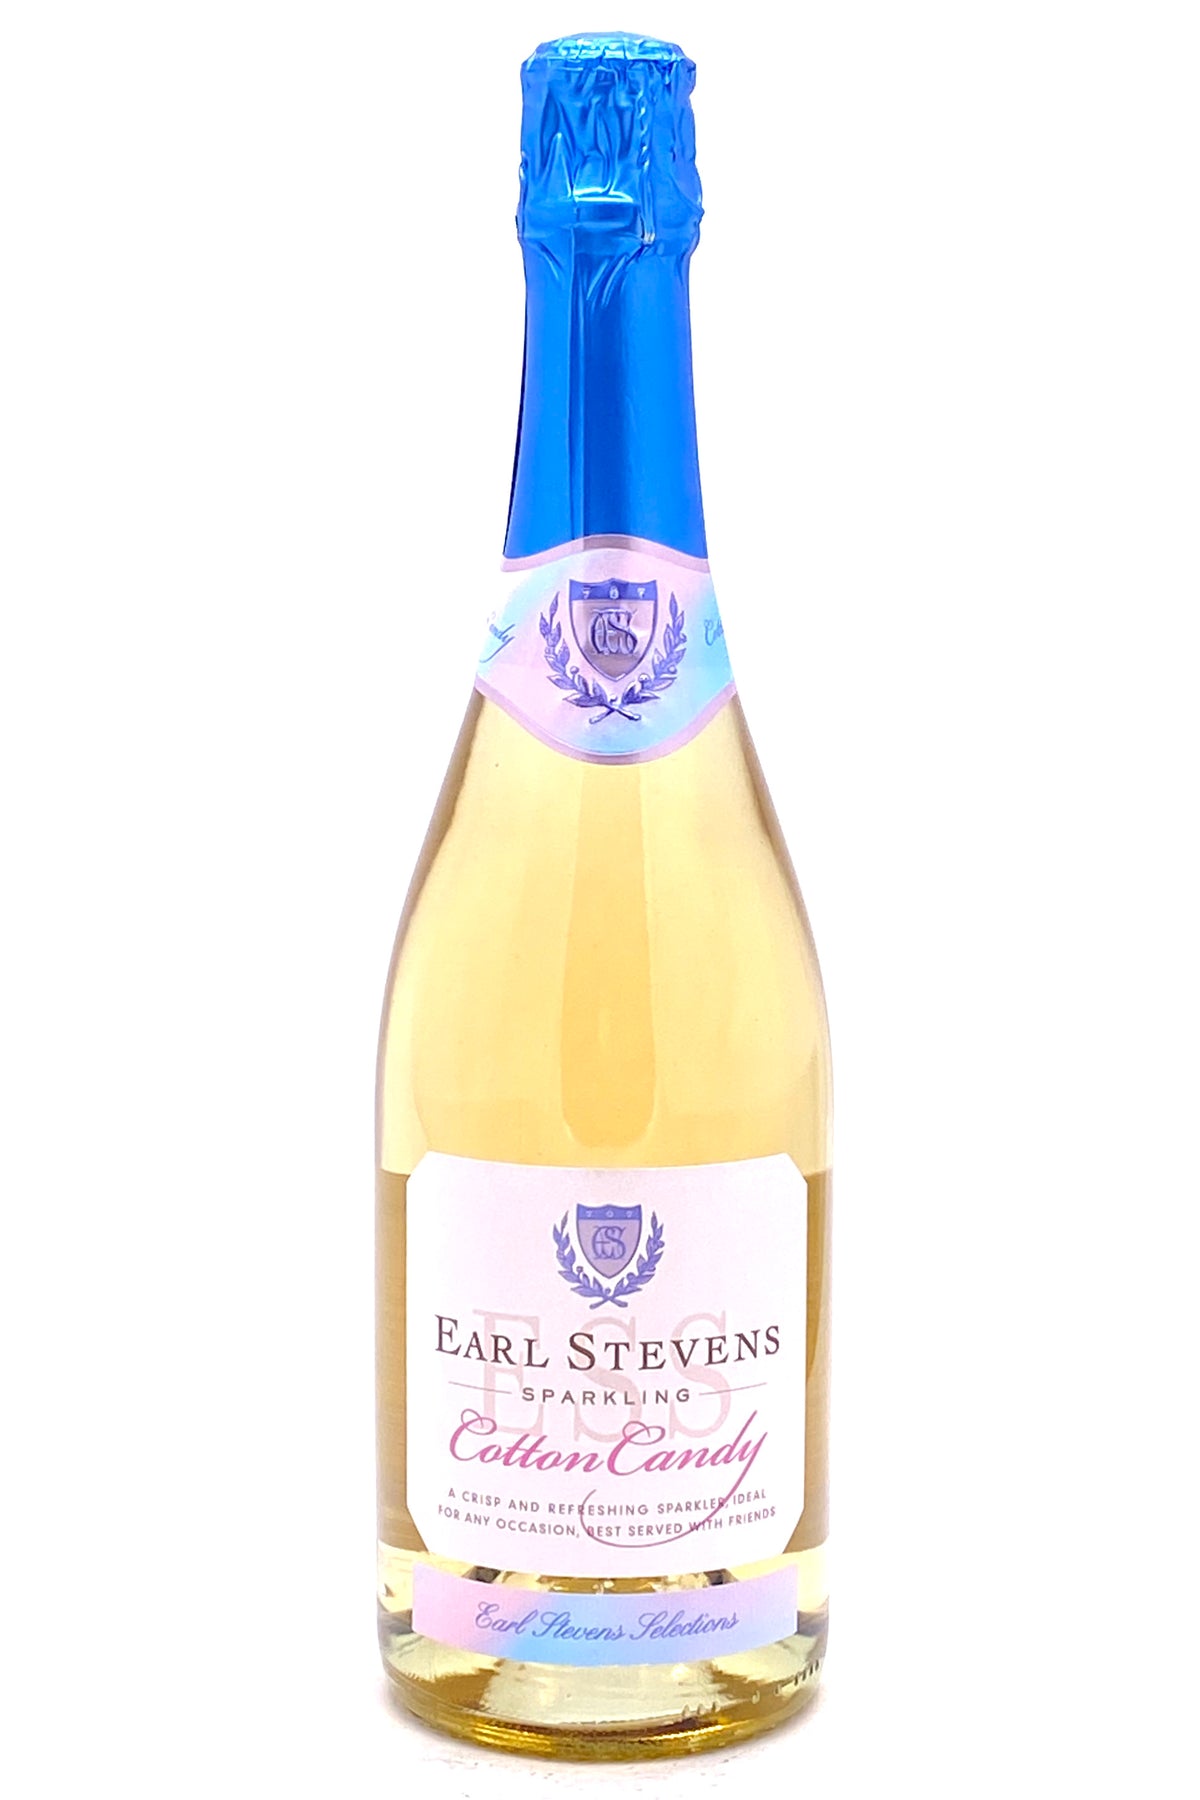 Earl Stevens Sparkling Wine Cotton Candy